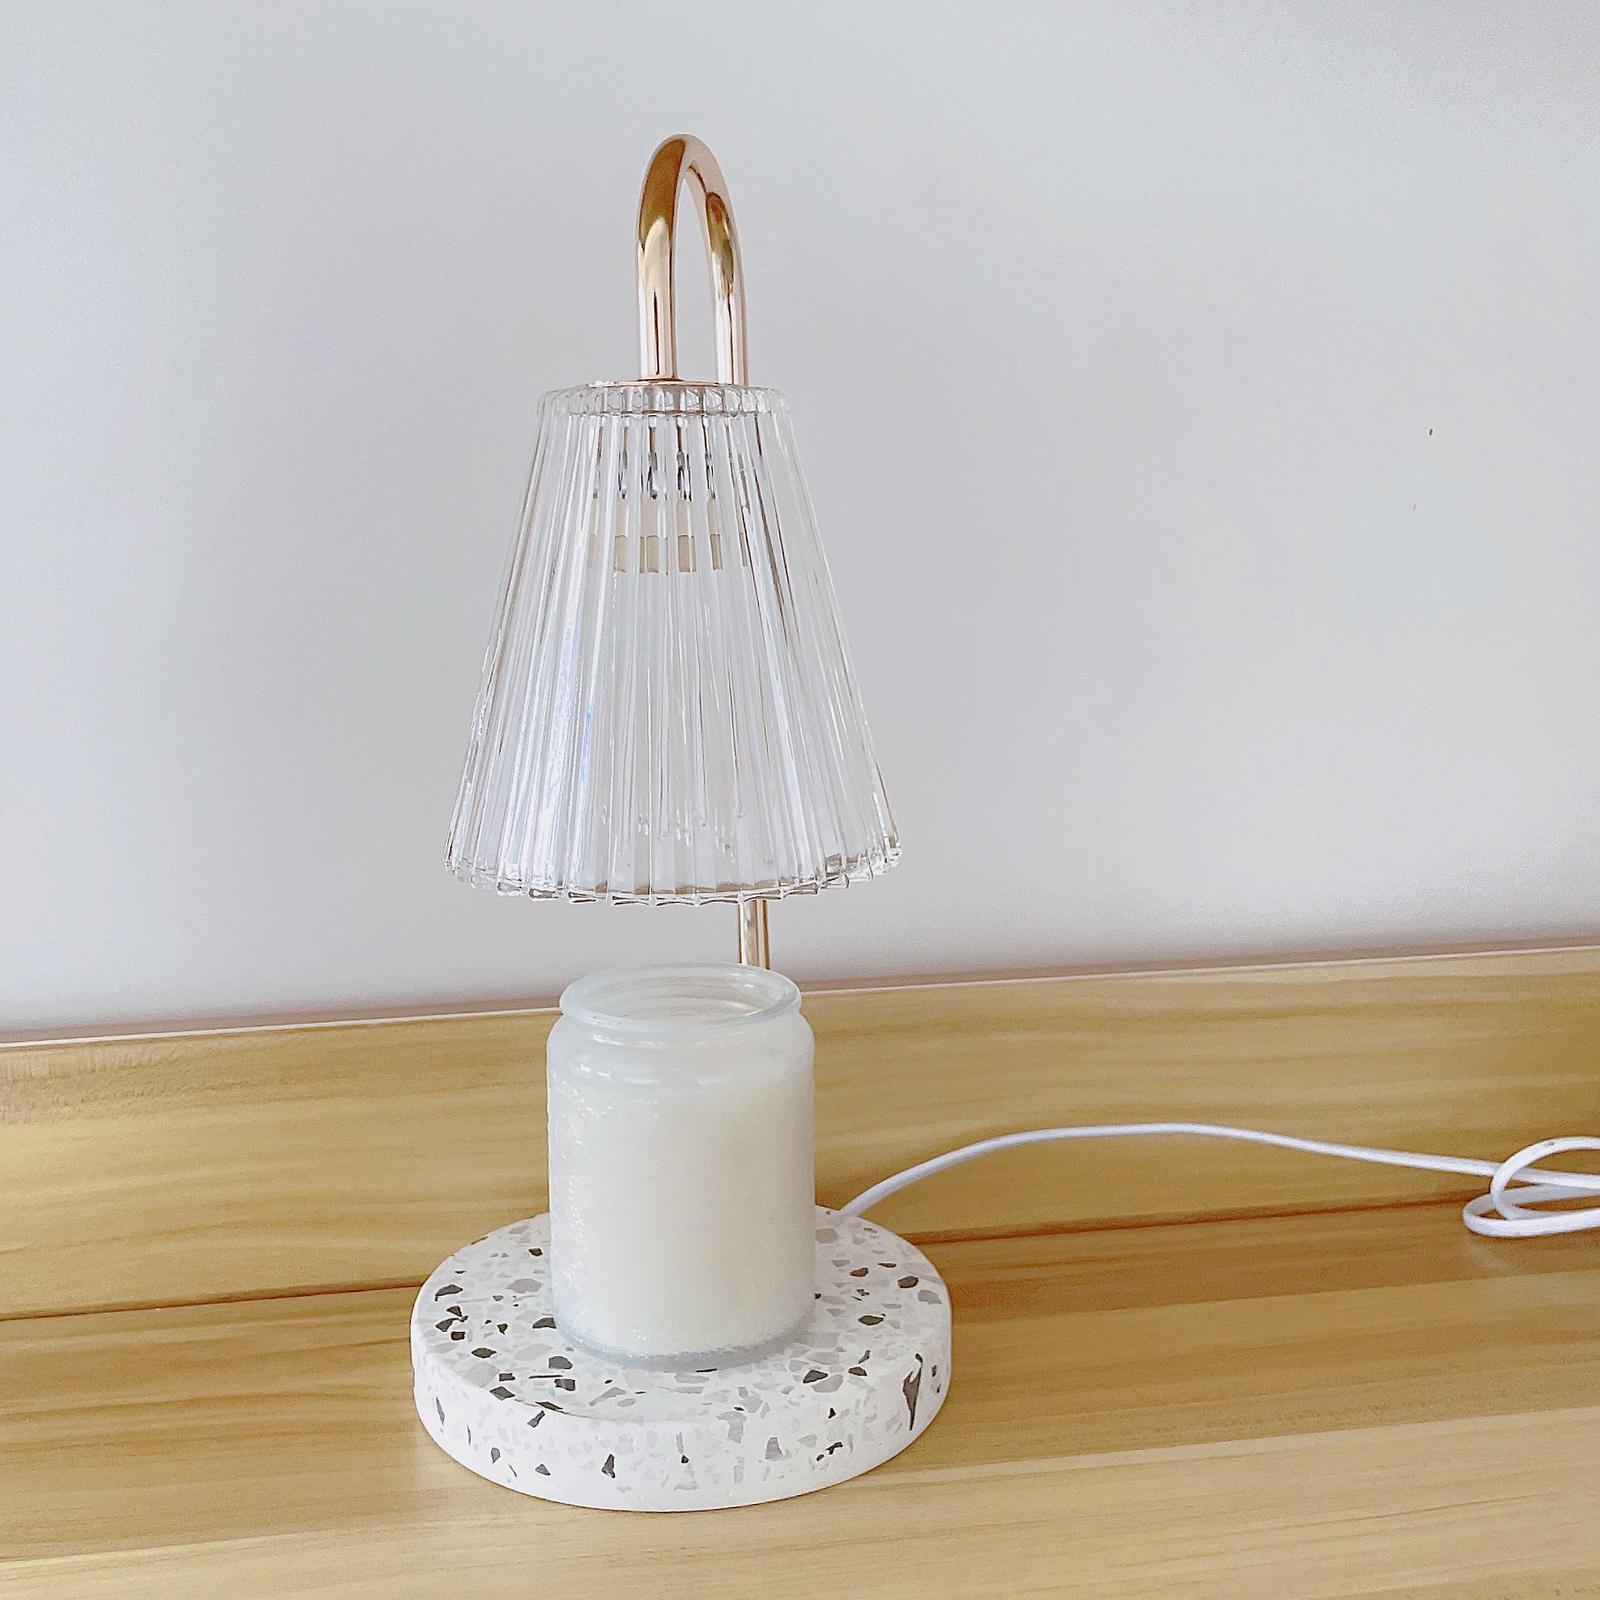 Retro Style Candle- Melts Warmer Dimmable Heater Room Candle Holder